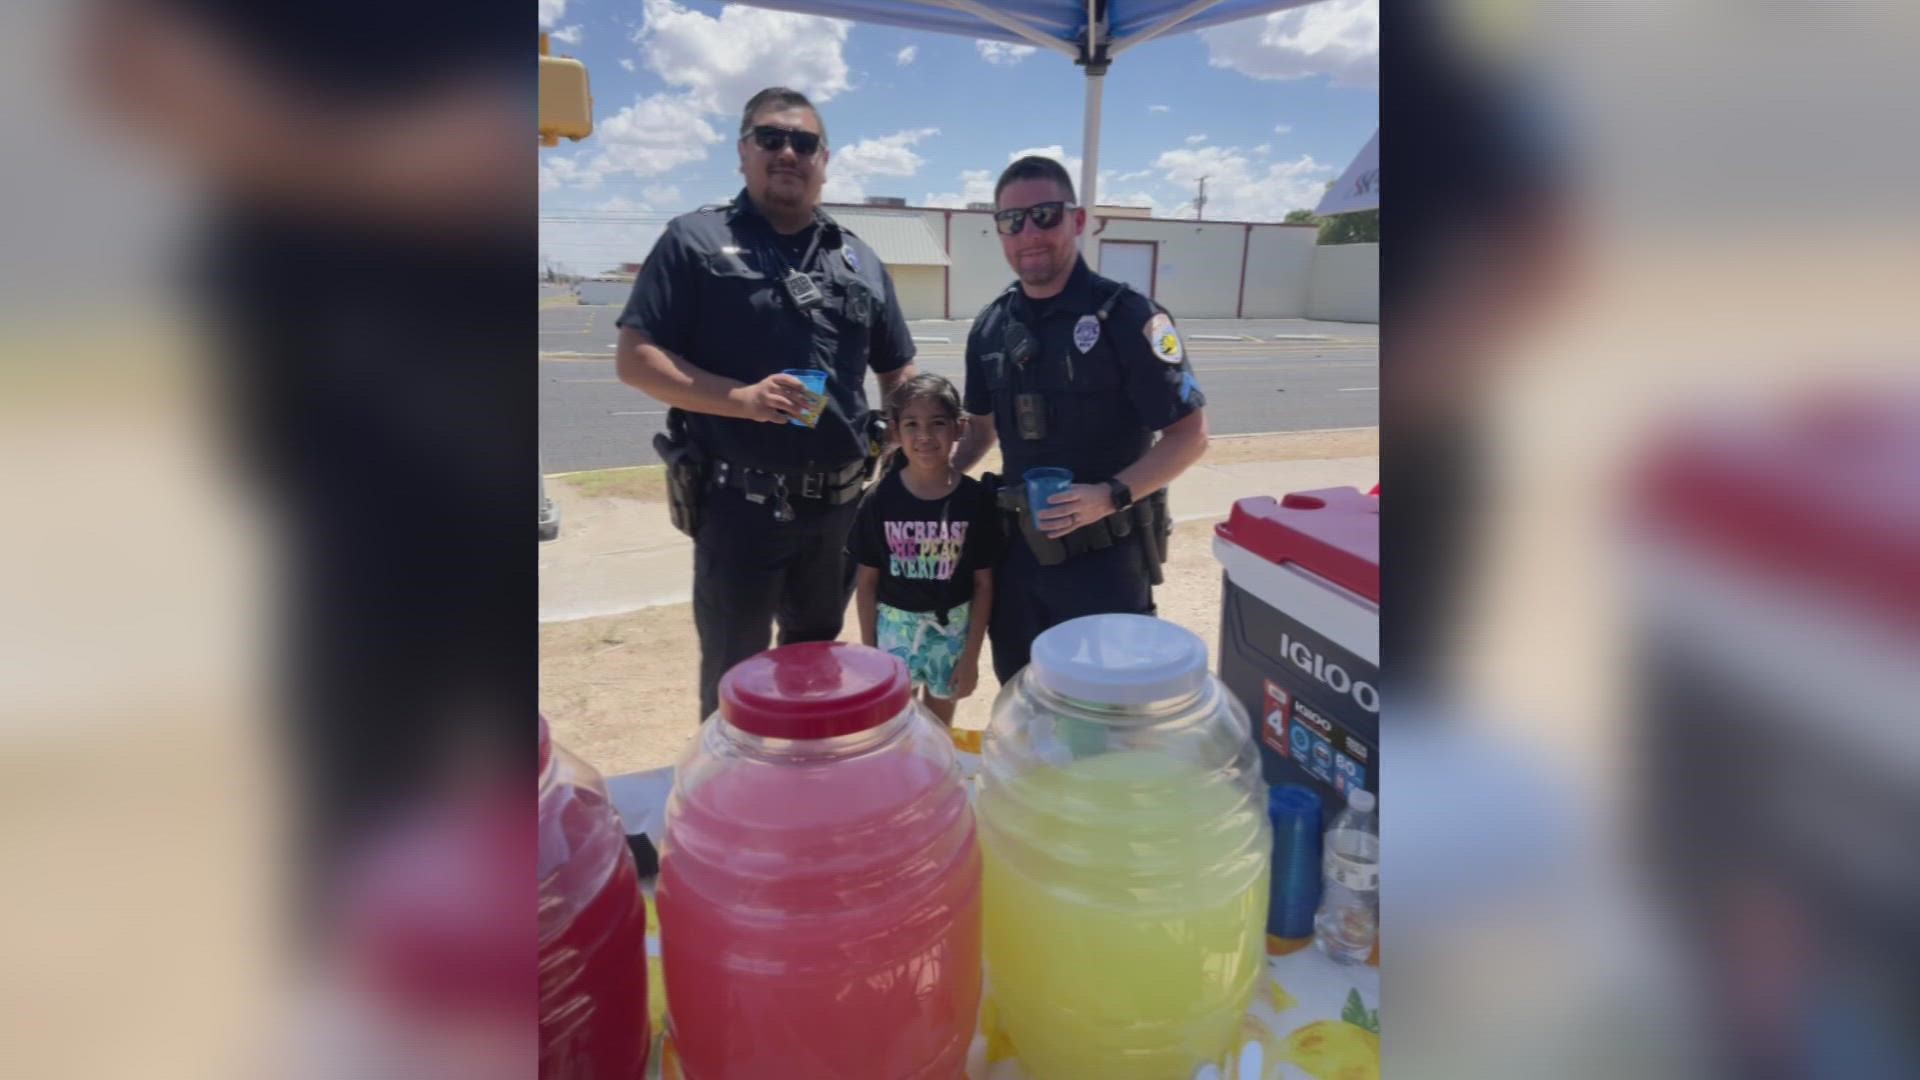 After starting her own Snow Cone stand, Genalyah wants to become and Odessa Police Officer